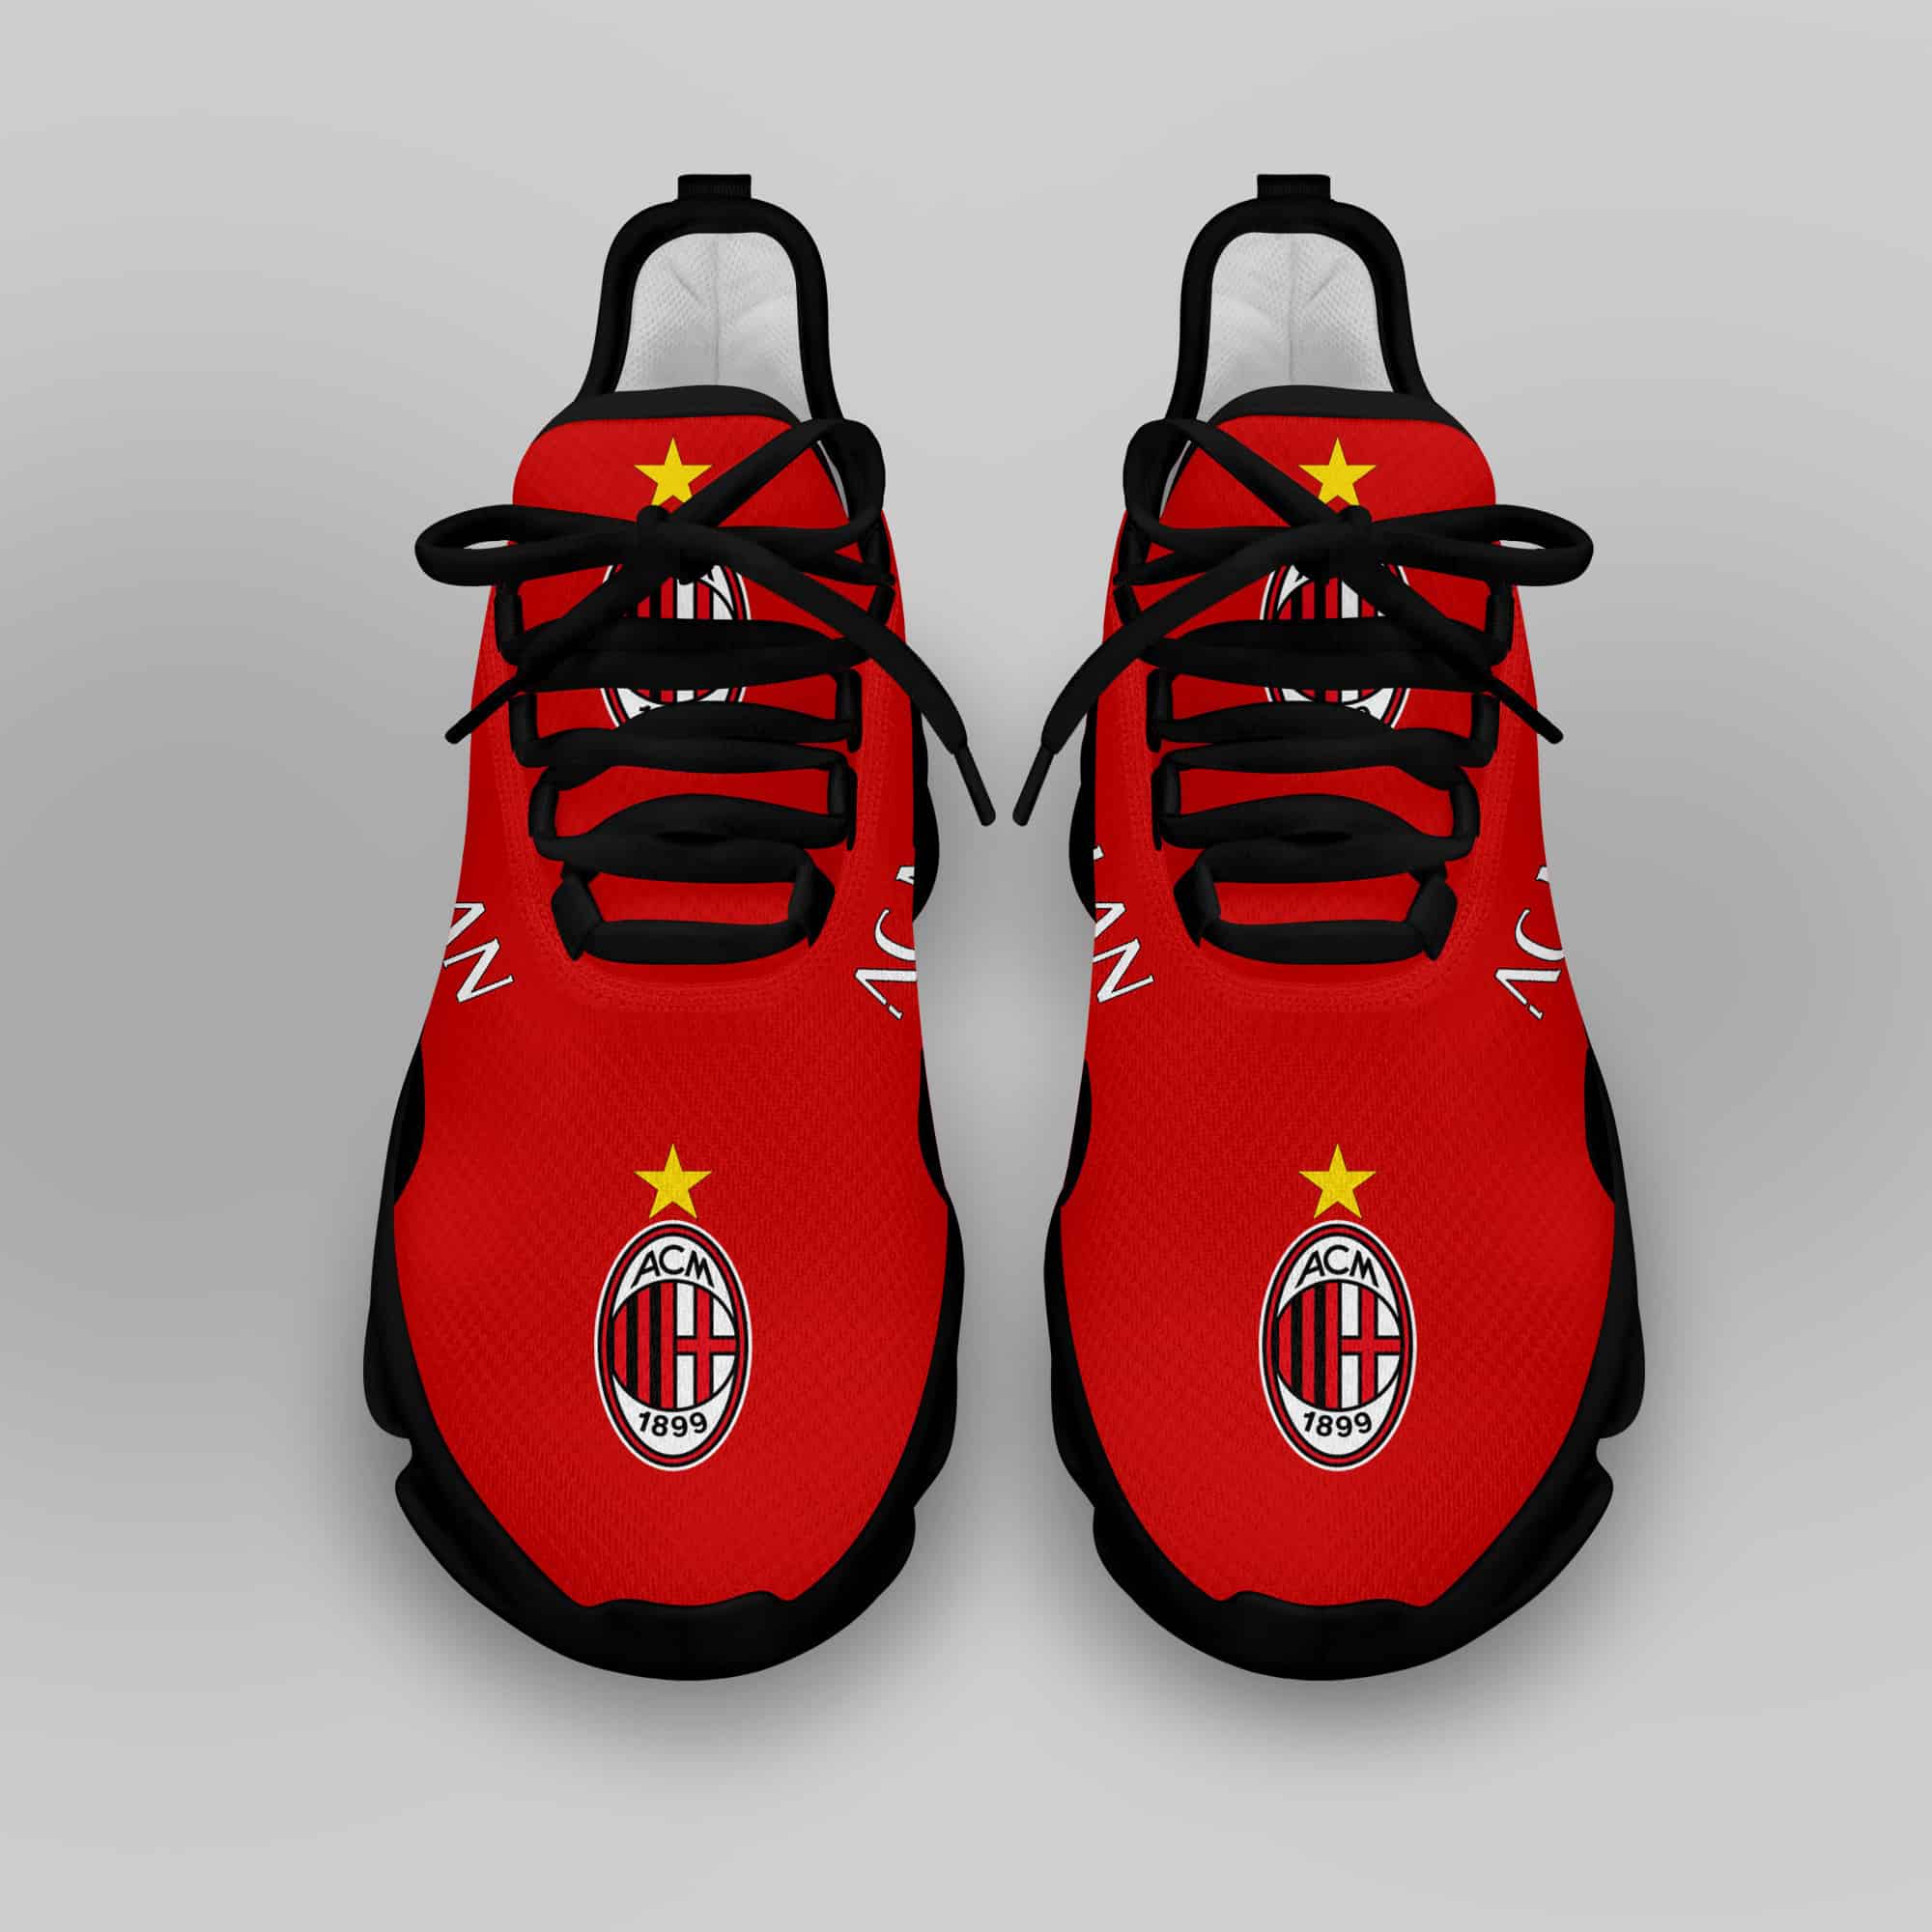 Ac Milan Running Shoes Max Soul Shoes Sneakers Ver 3 4